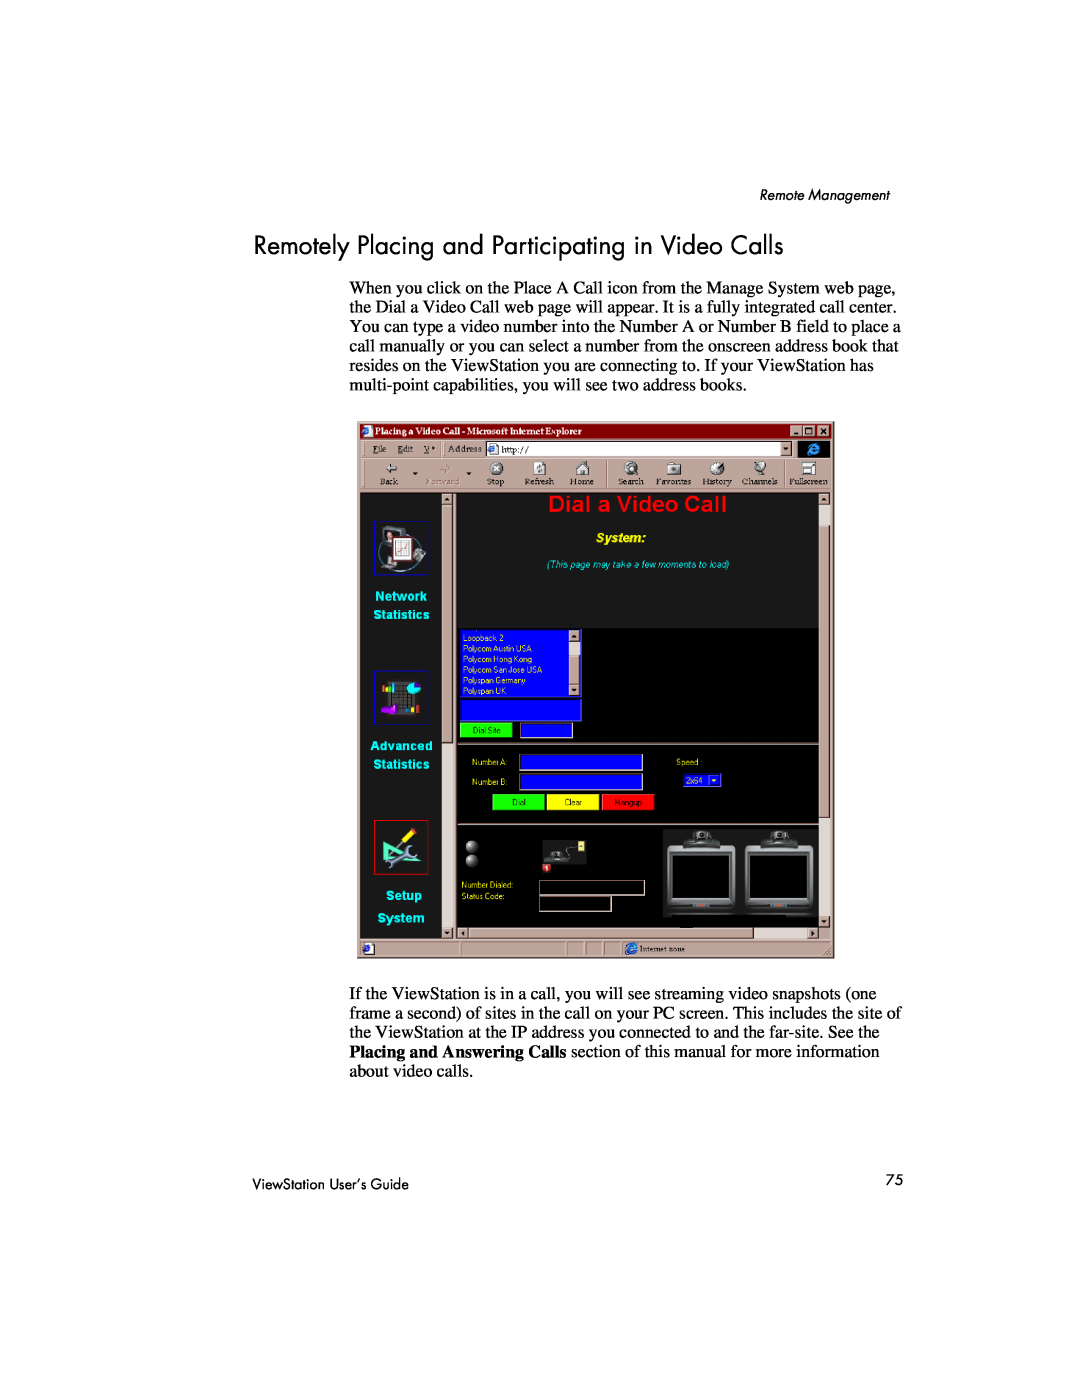 Polycom 128, 512, MP manual Remotely Placing and Participating in Video Calls 